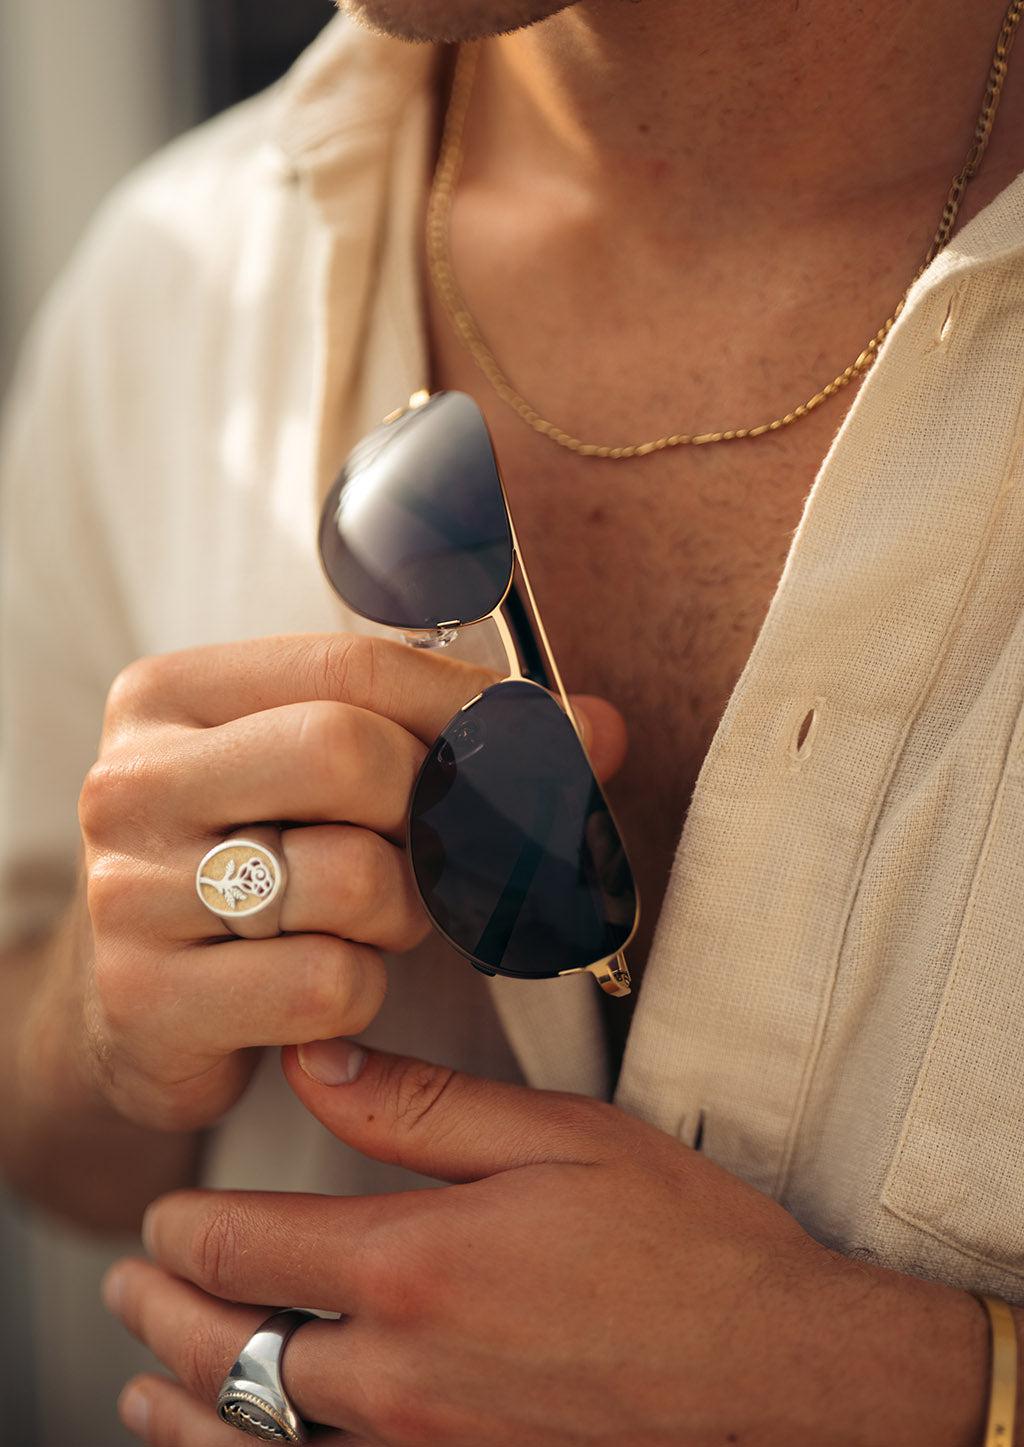 Titan - Titanium Aviator Sunglasses V2 - 24K Gold Plated with real gold. The details on our gold aviators is stunning.